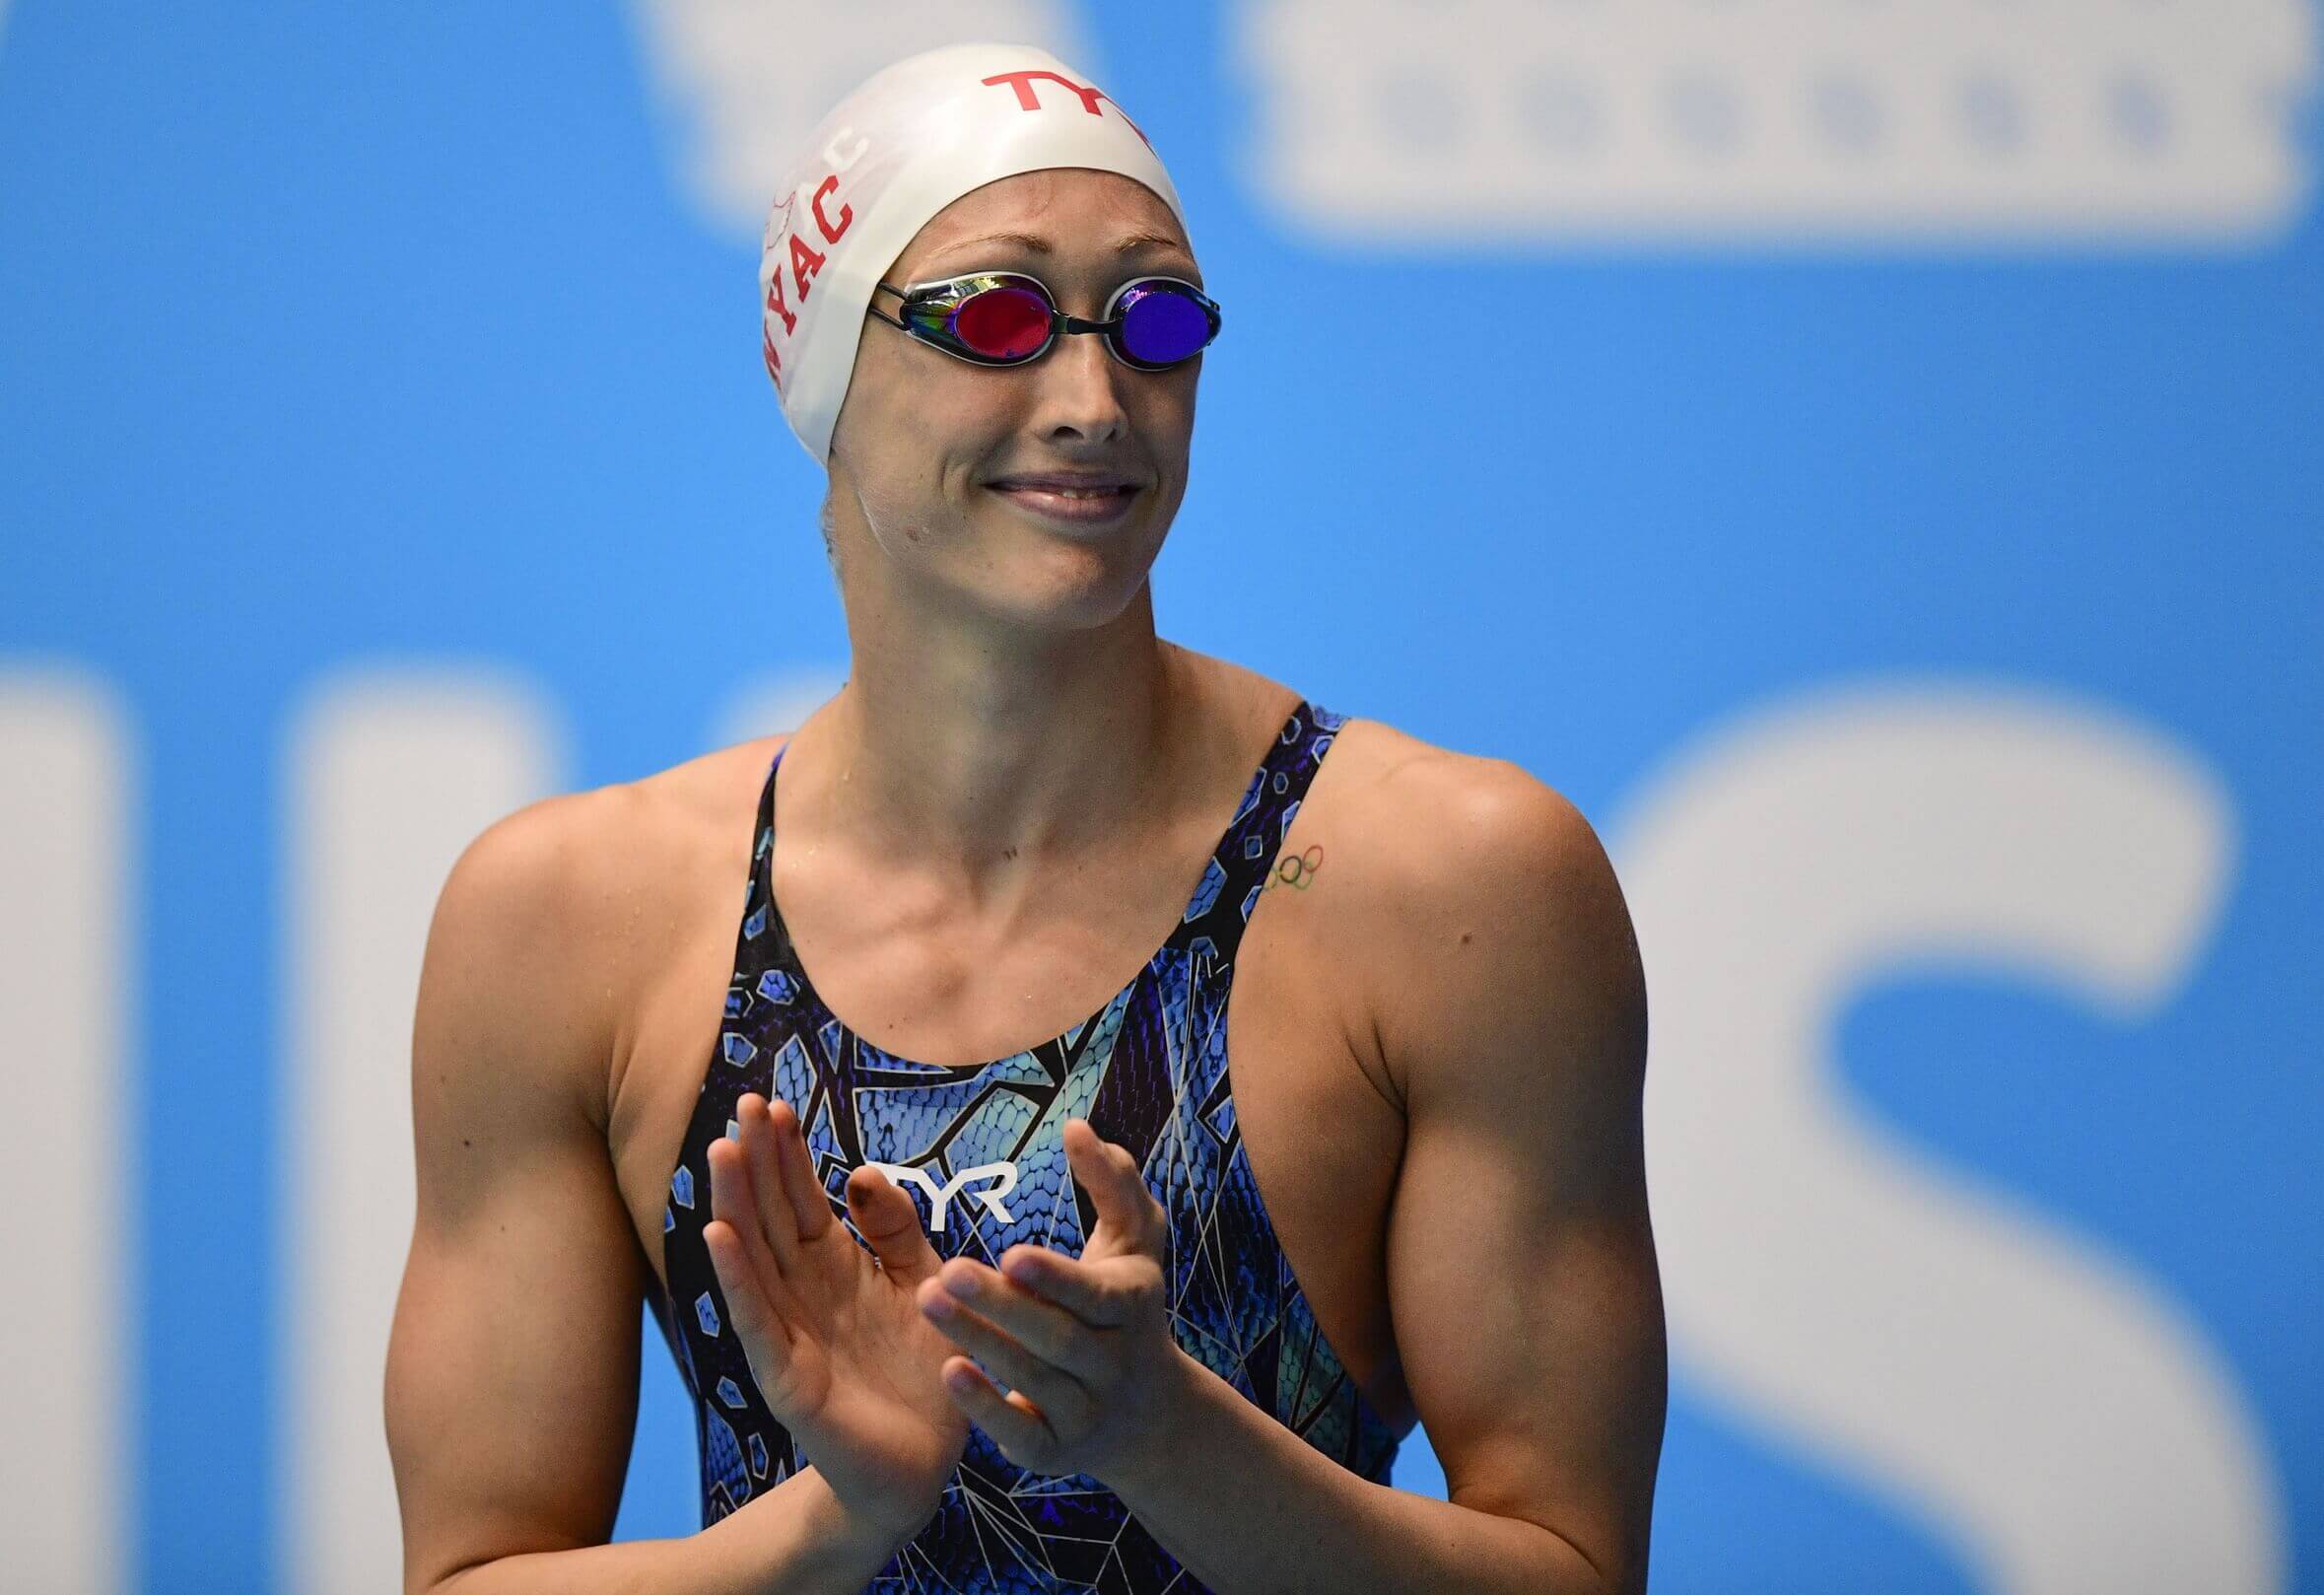 Breeja Larson clapping her hands with a blue swim suit, white swimming cap and goggles